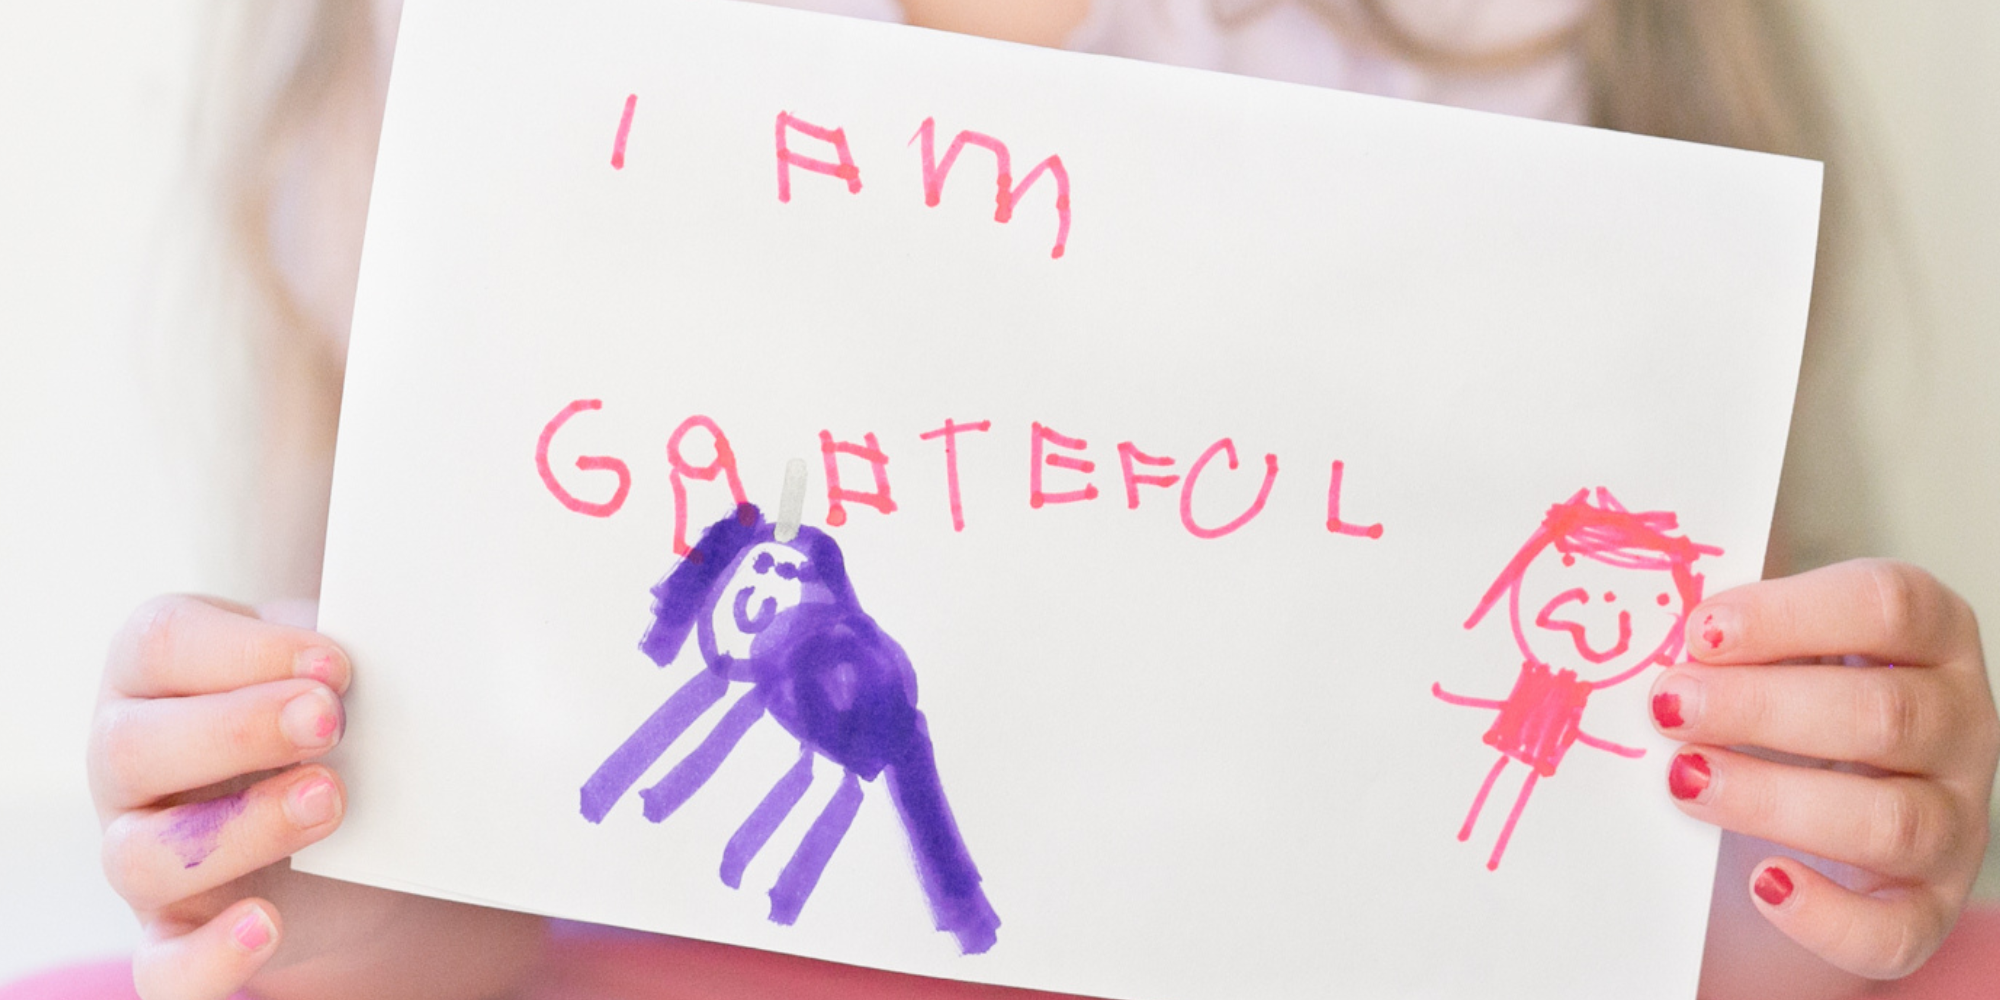 Tiny hands with red chipped nail polish hold a rectangle of white paper. Written in pink marker in a child's handwriting is 